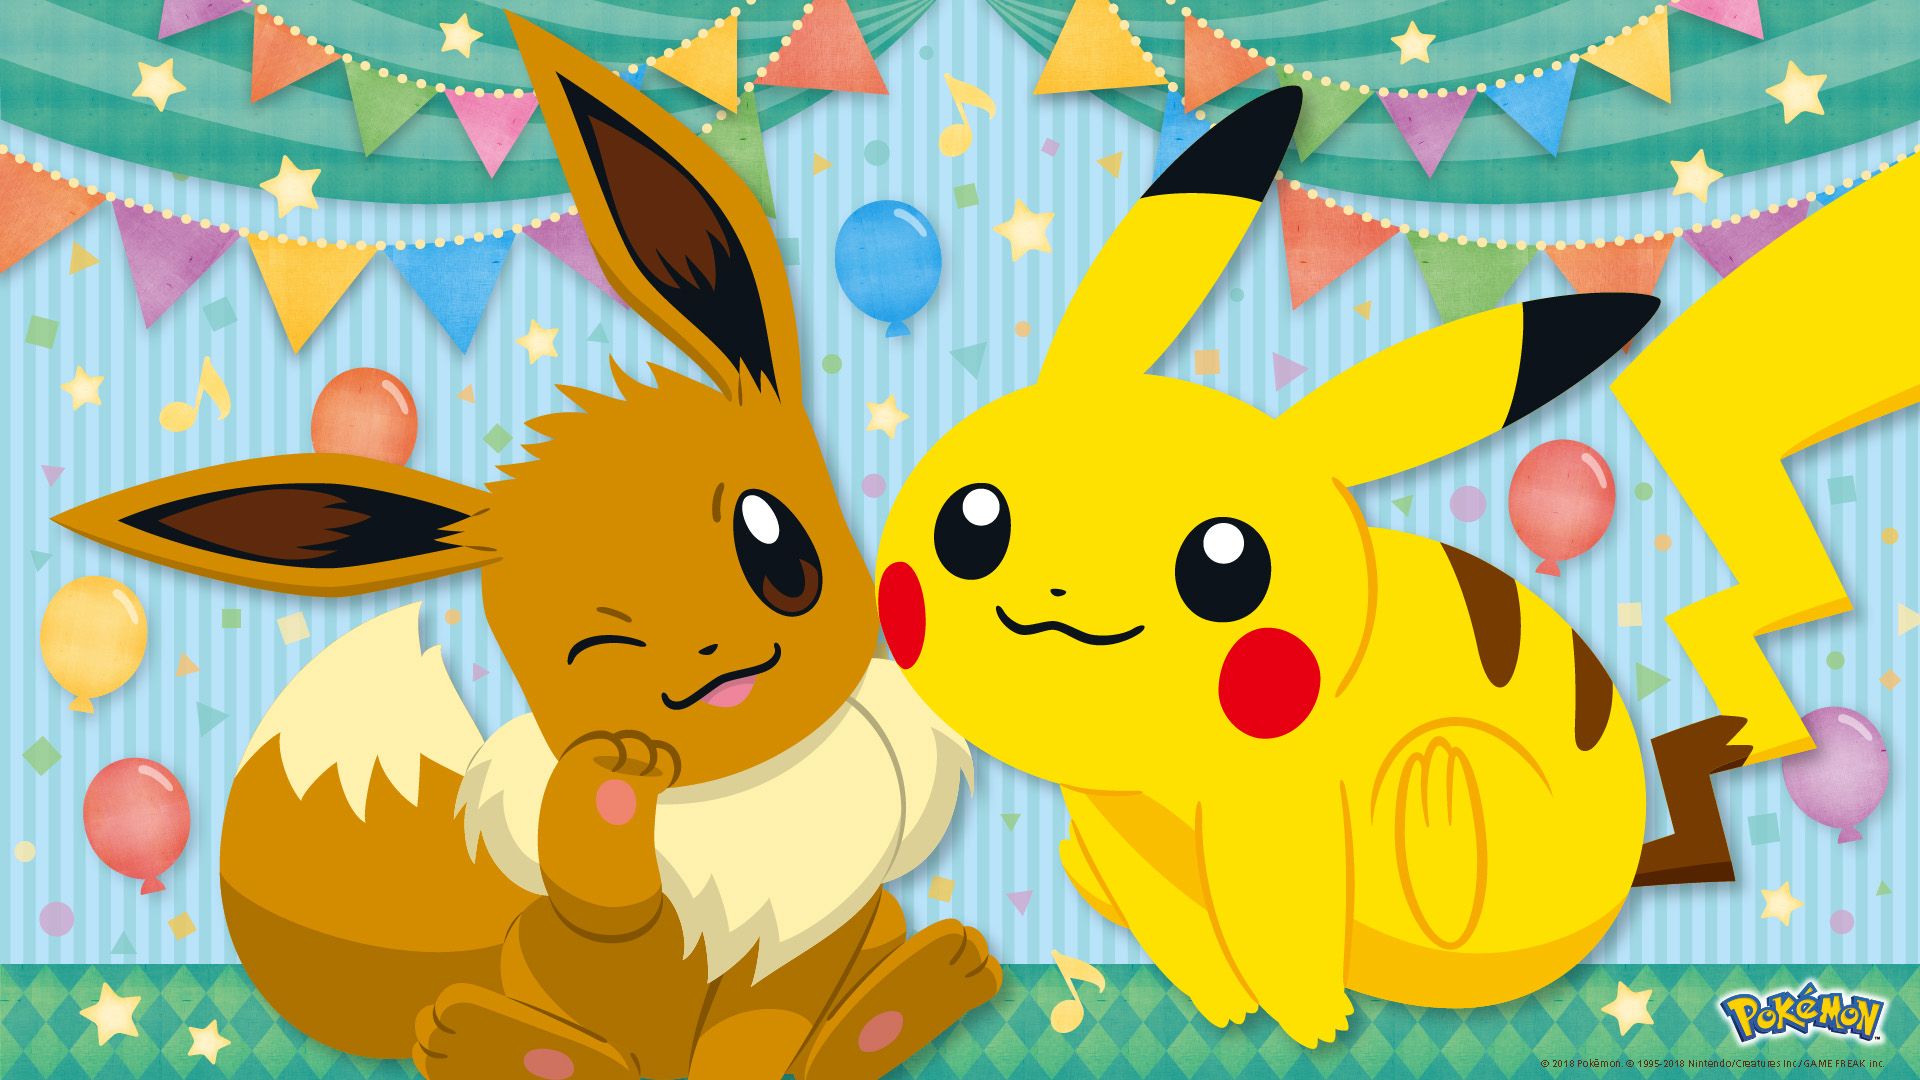 Decorate your devices with Pokémon birthday 2018 wallpaper